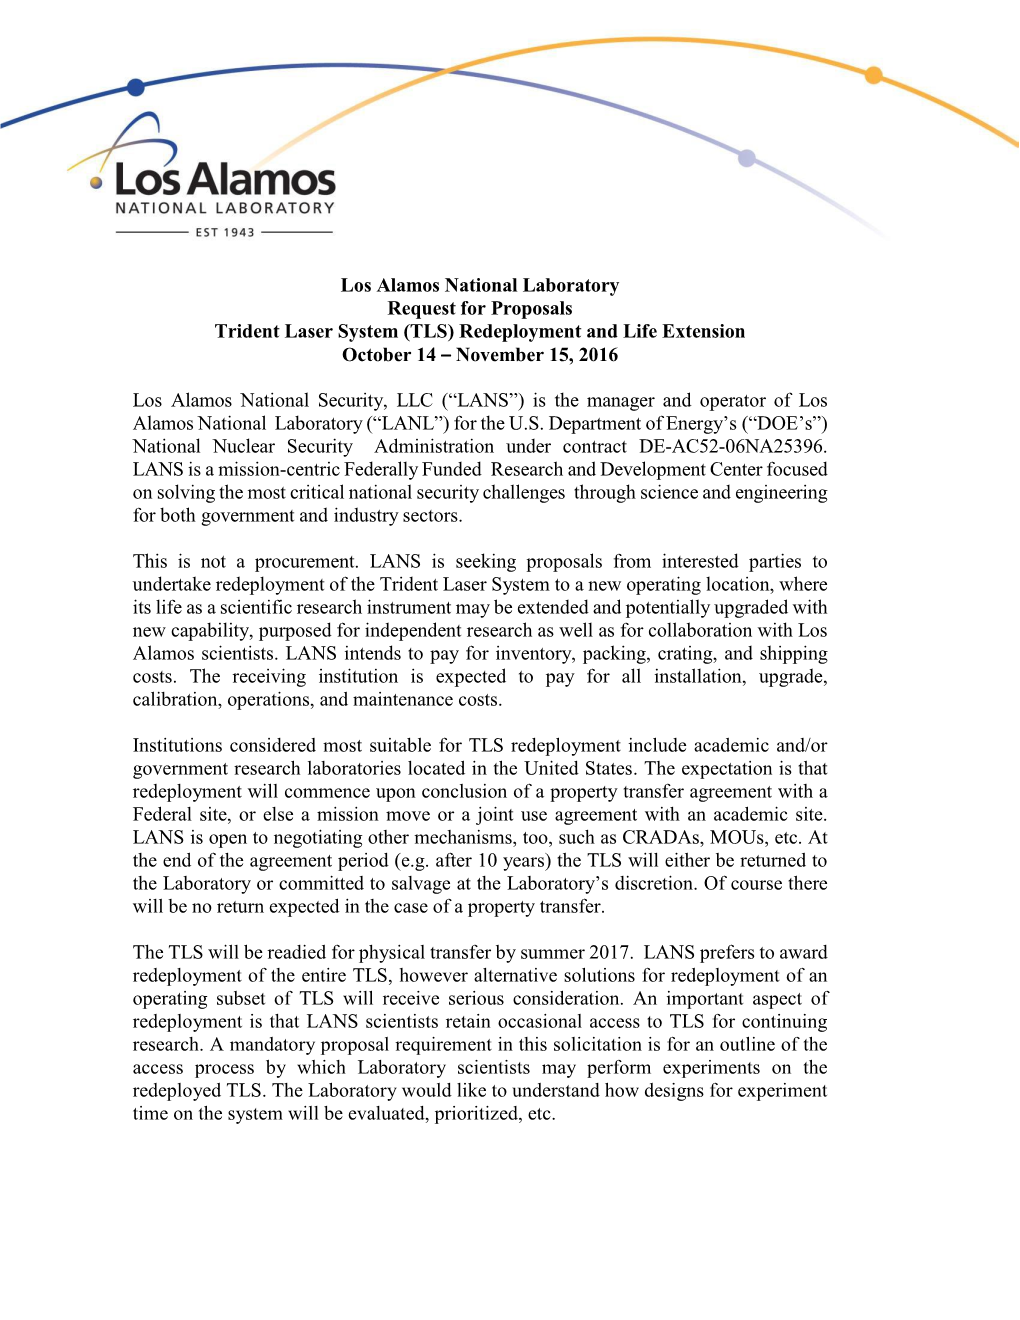 LAUR-16-27650 Los Alamos National Laboratory Request for Proposals